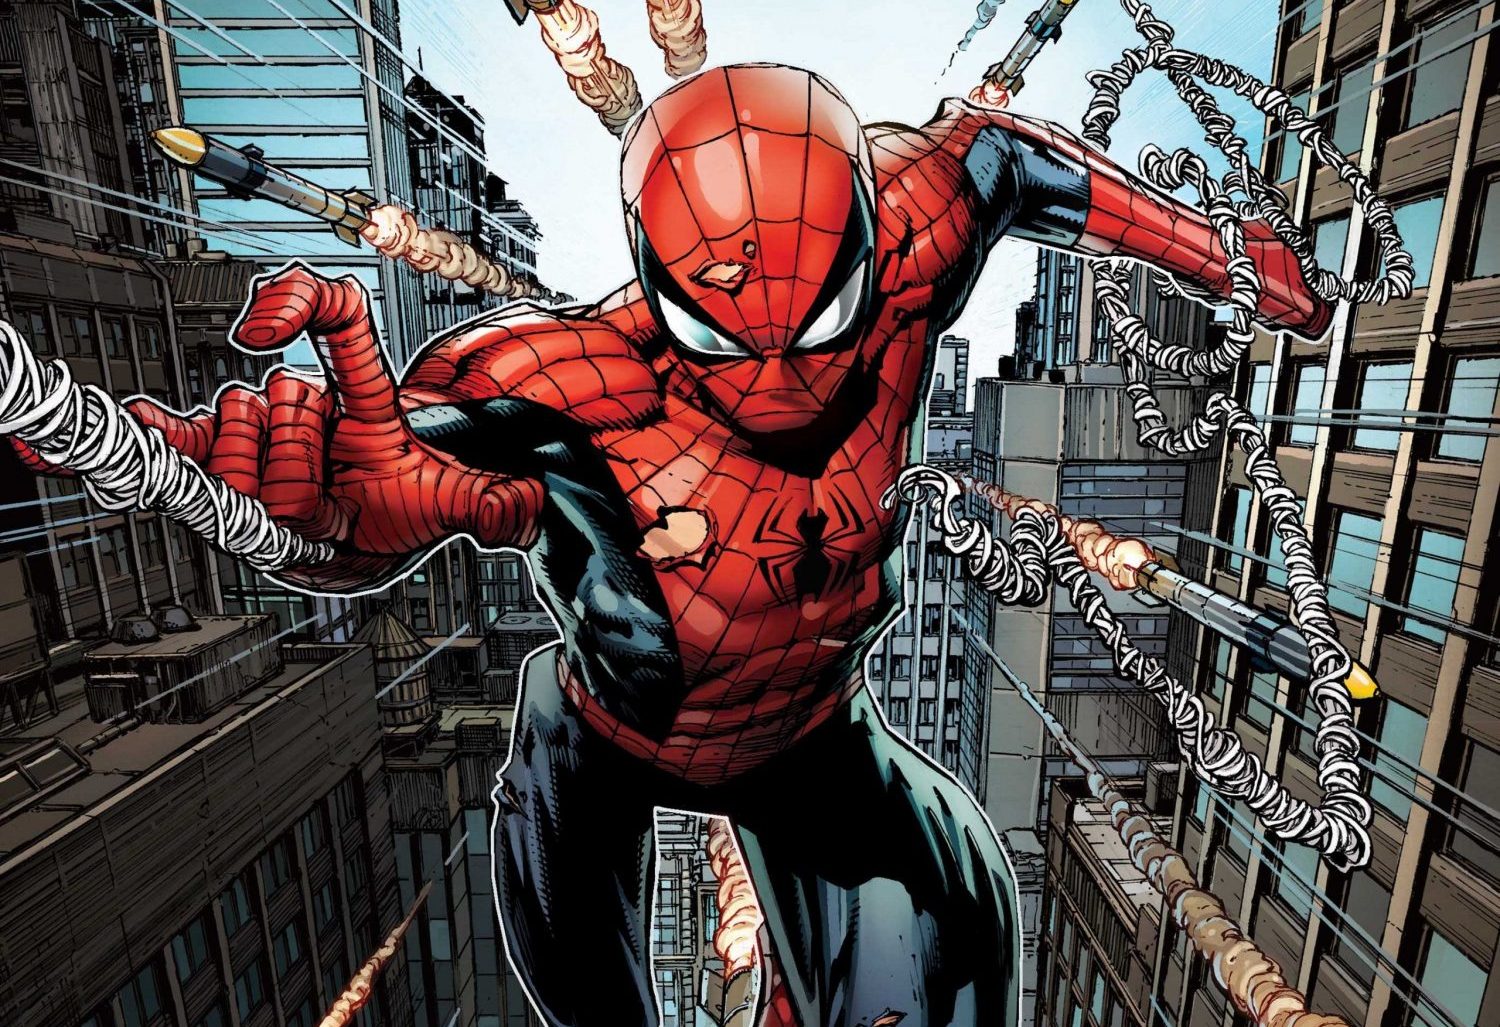 Joe Kelly and Chris Bachalo go non-stop for Spider-Man in new book out June 2020